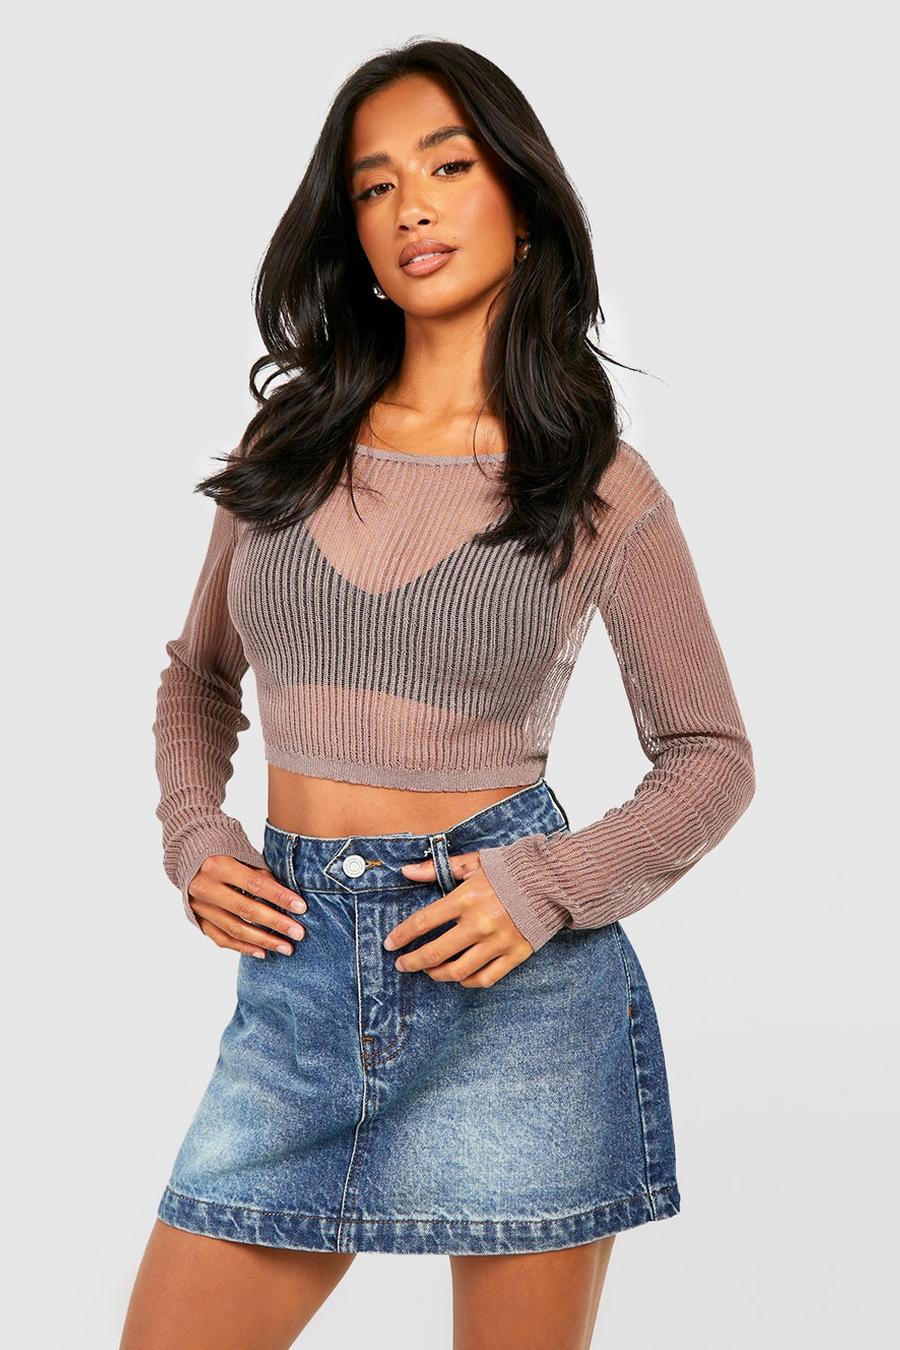 Mocha Petite Sheer Ladder Stitch Knitted Top